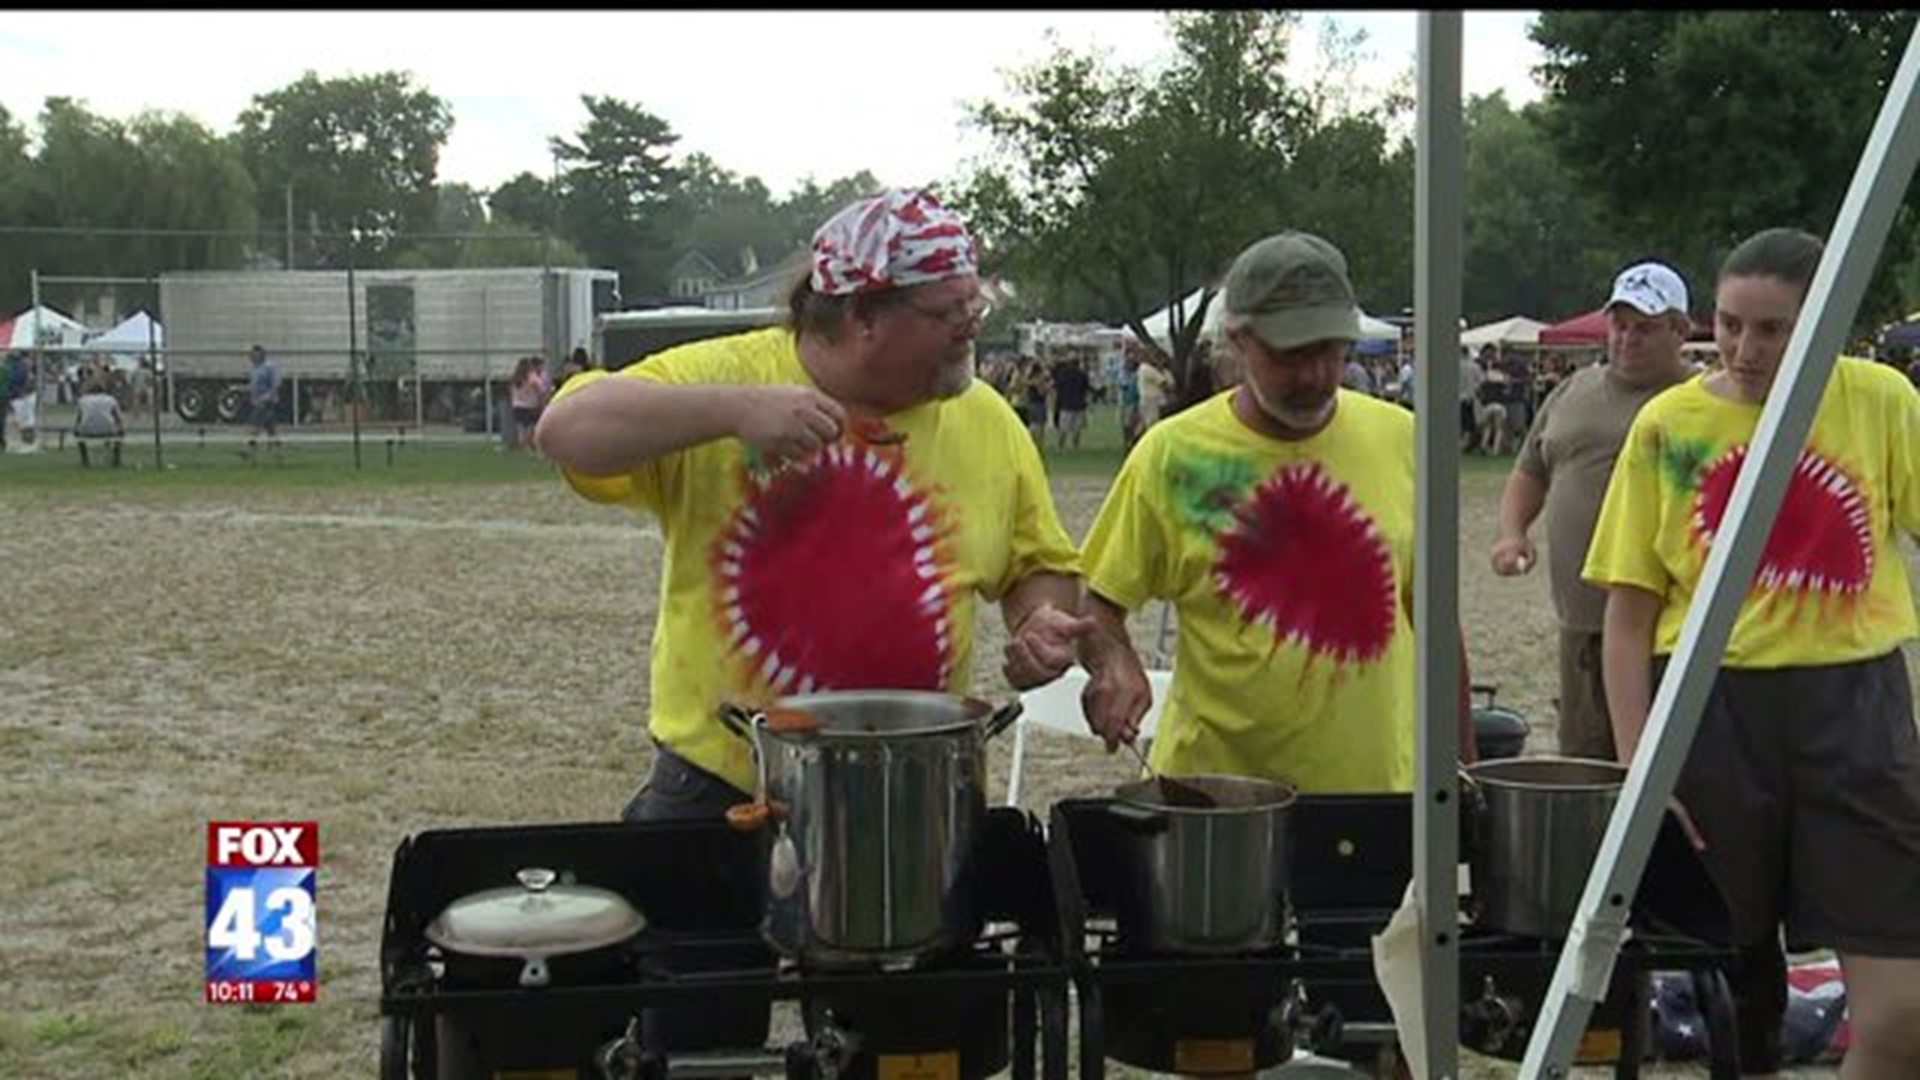 19th Annual Chili Cookoff in Hanover